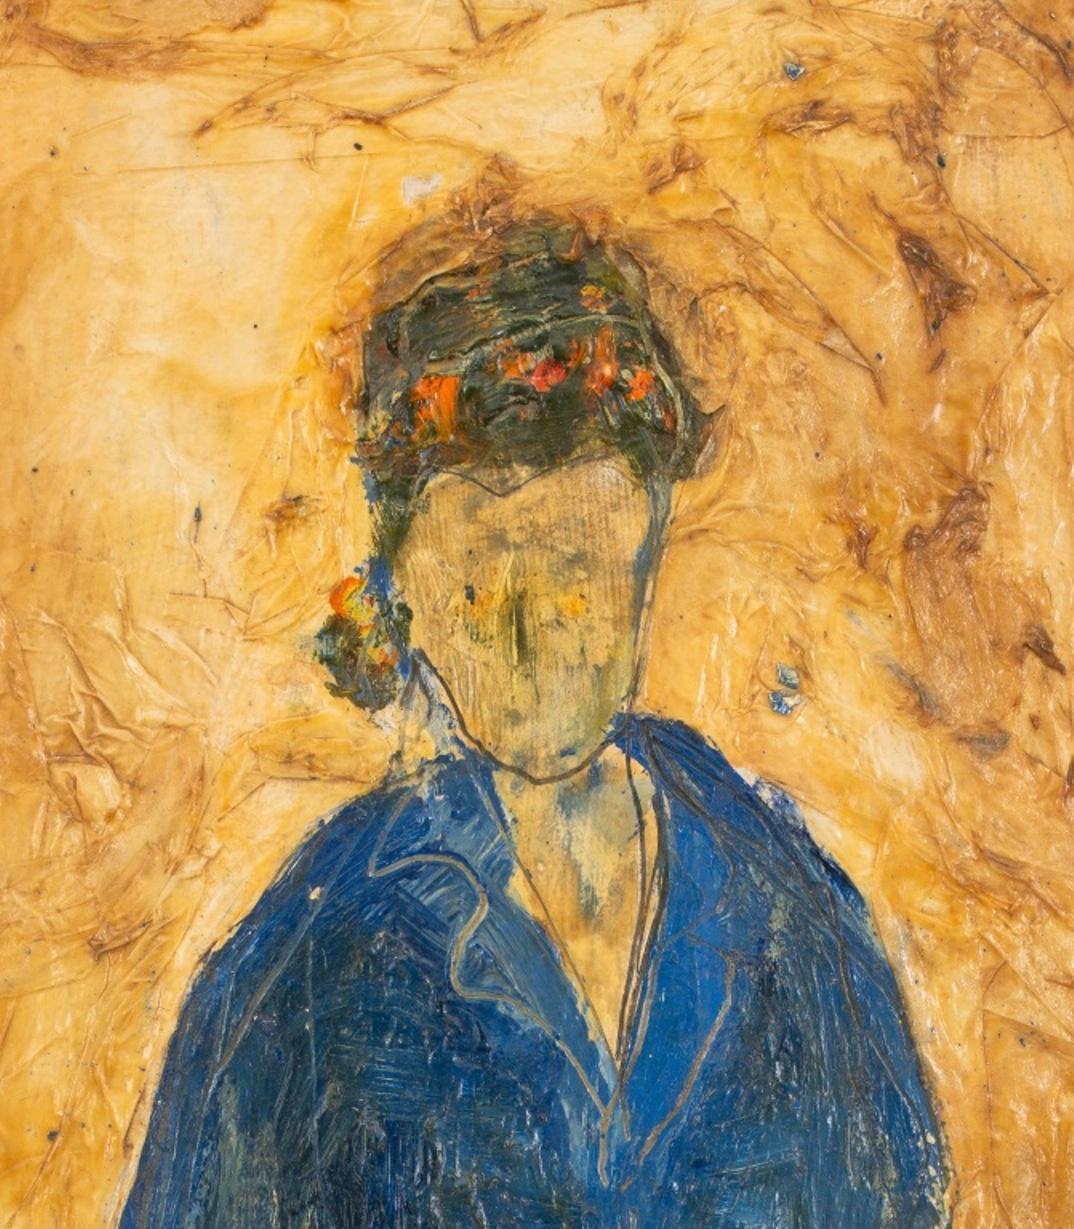 Mary Jo Schwalbach (American, b. 1939), Portrait of a Lady, oil on wood, apparently unsigned, unframed. 

Dimensions: 20.25